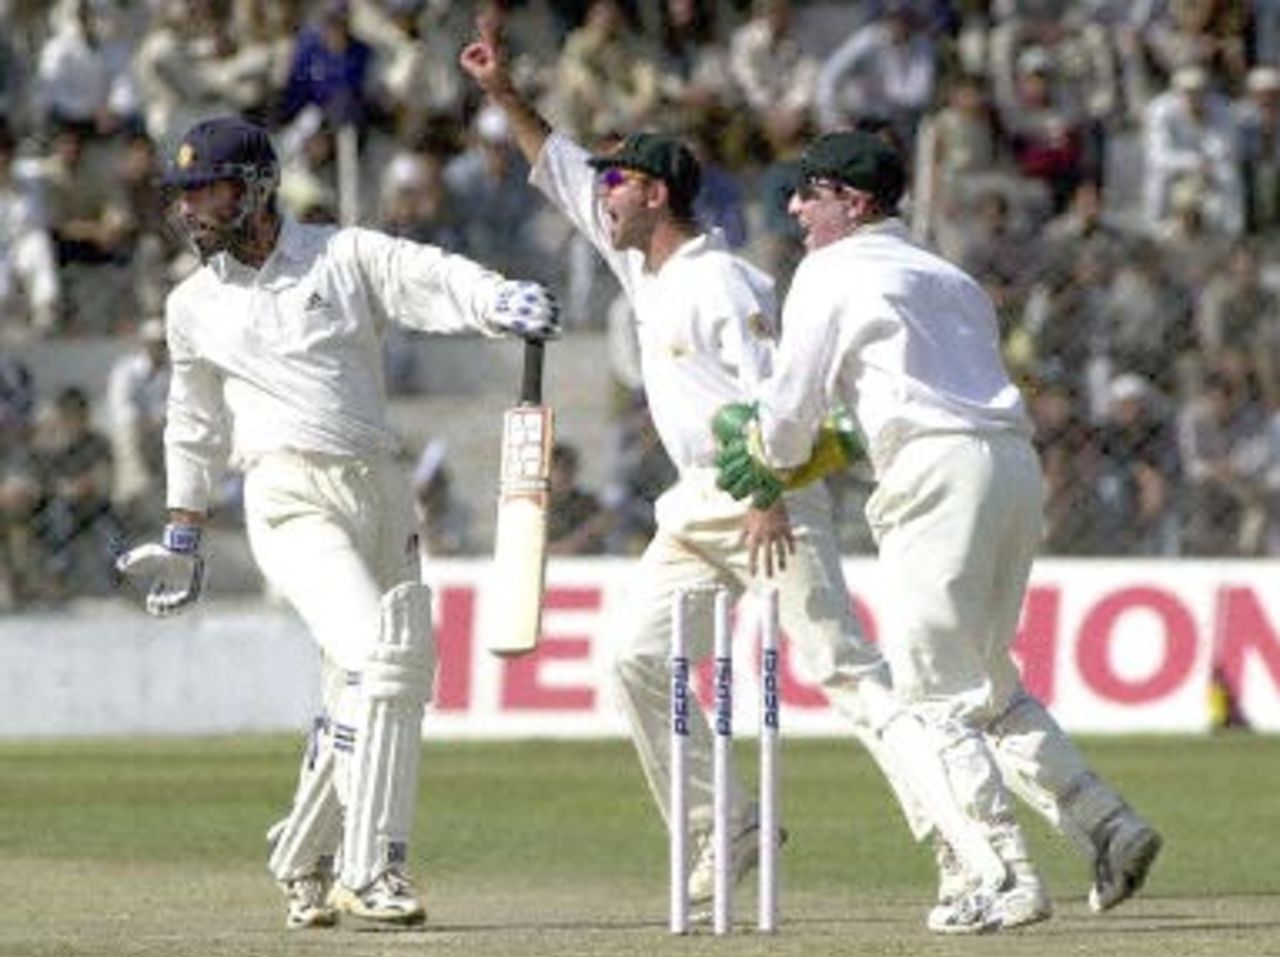 Board President's XI batsman Sarandeep Singh (L) is runout for zero runs as Australian wicketkeeper Brad Haddin (R) and Ricky Ponting (C) celebrate during the second day of their three-day match in New Delhi 07 March 2001. India scored 221 in reply to Australia's 451 in the first innings.